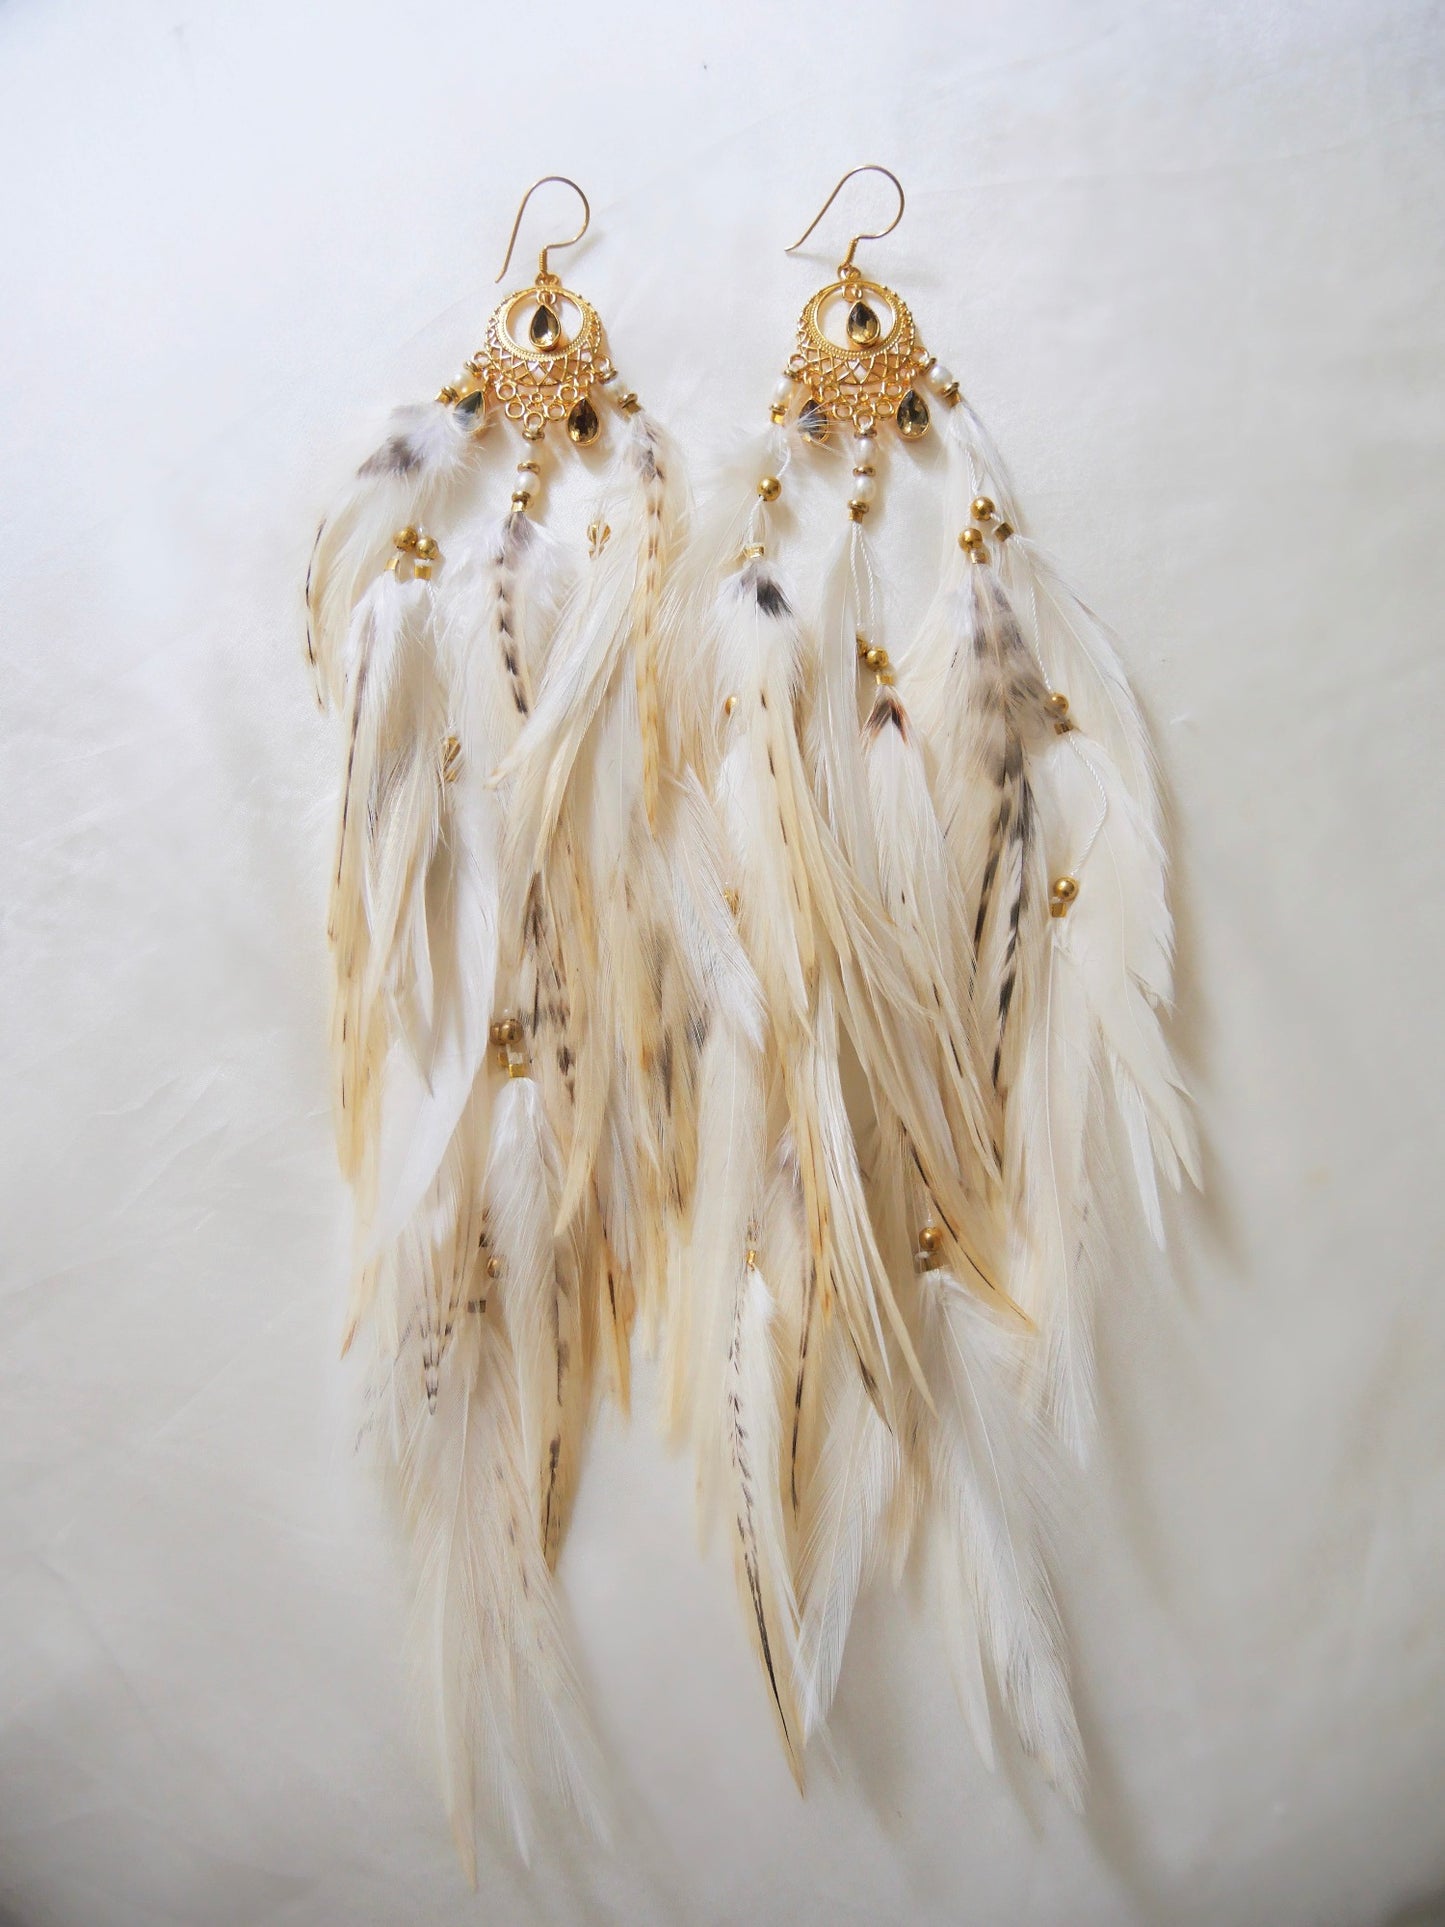 Bohemian Goddess earrings named My Inner Burning Fire with citrine crystals yellow creamy and patterned feathers from Bohemian Goddess brand.